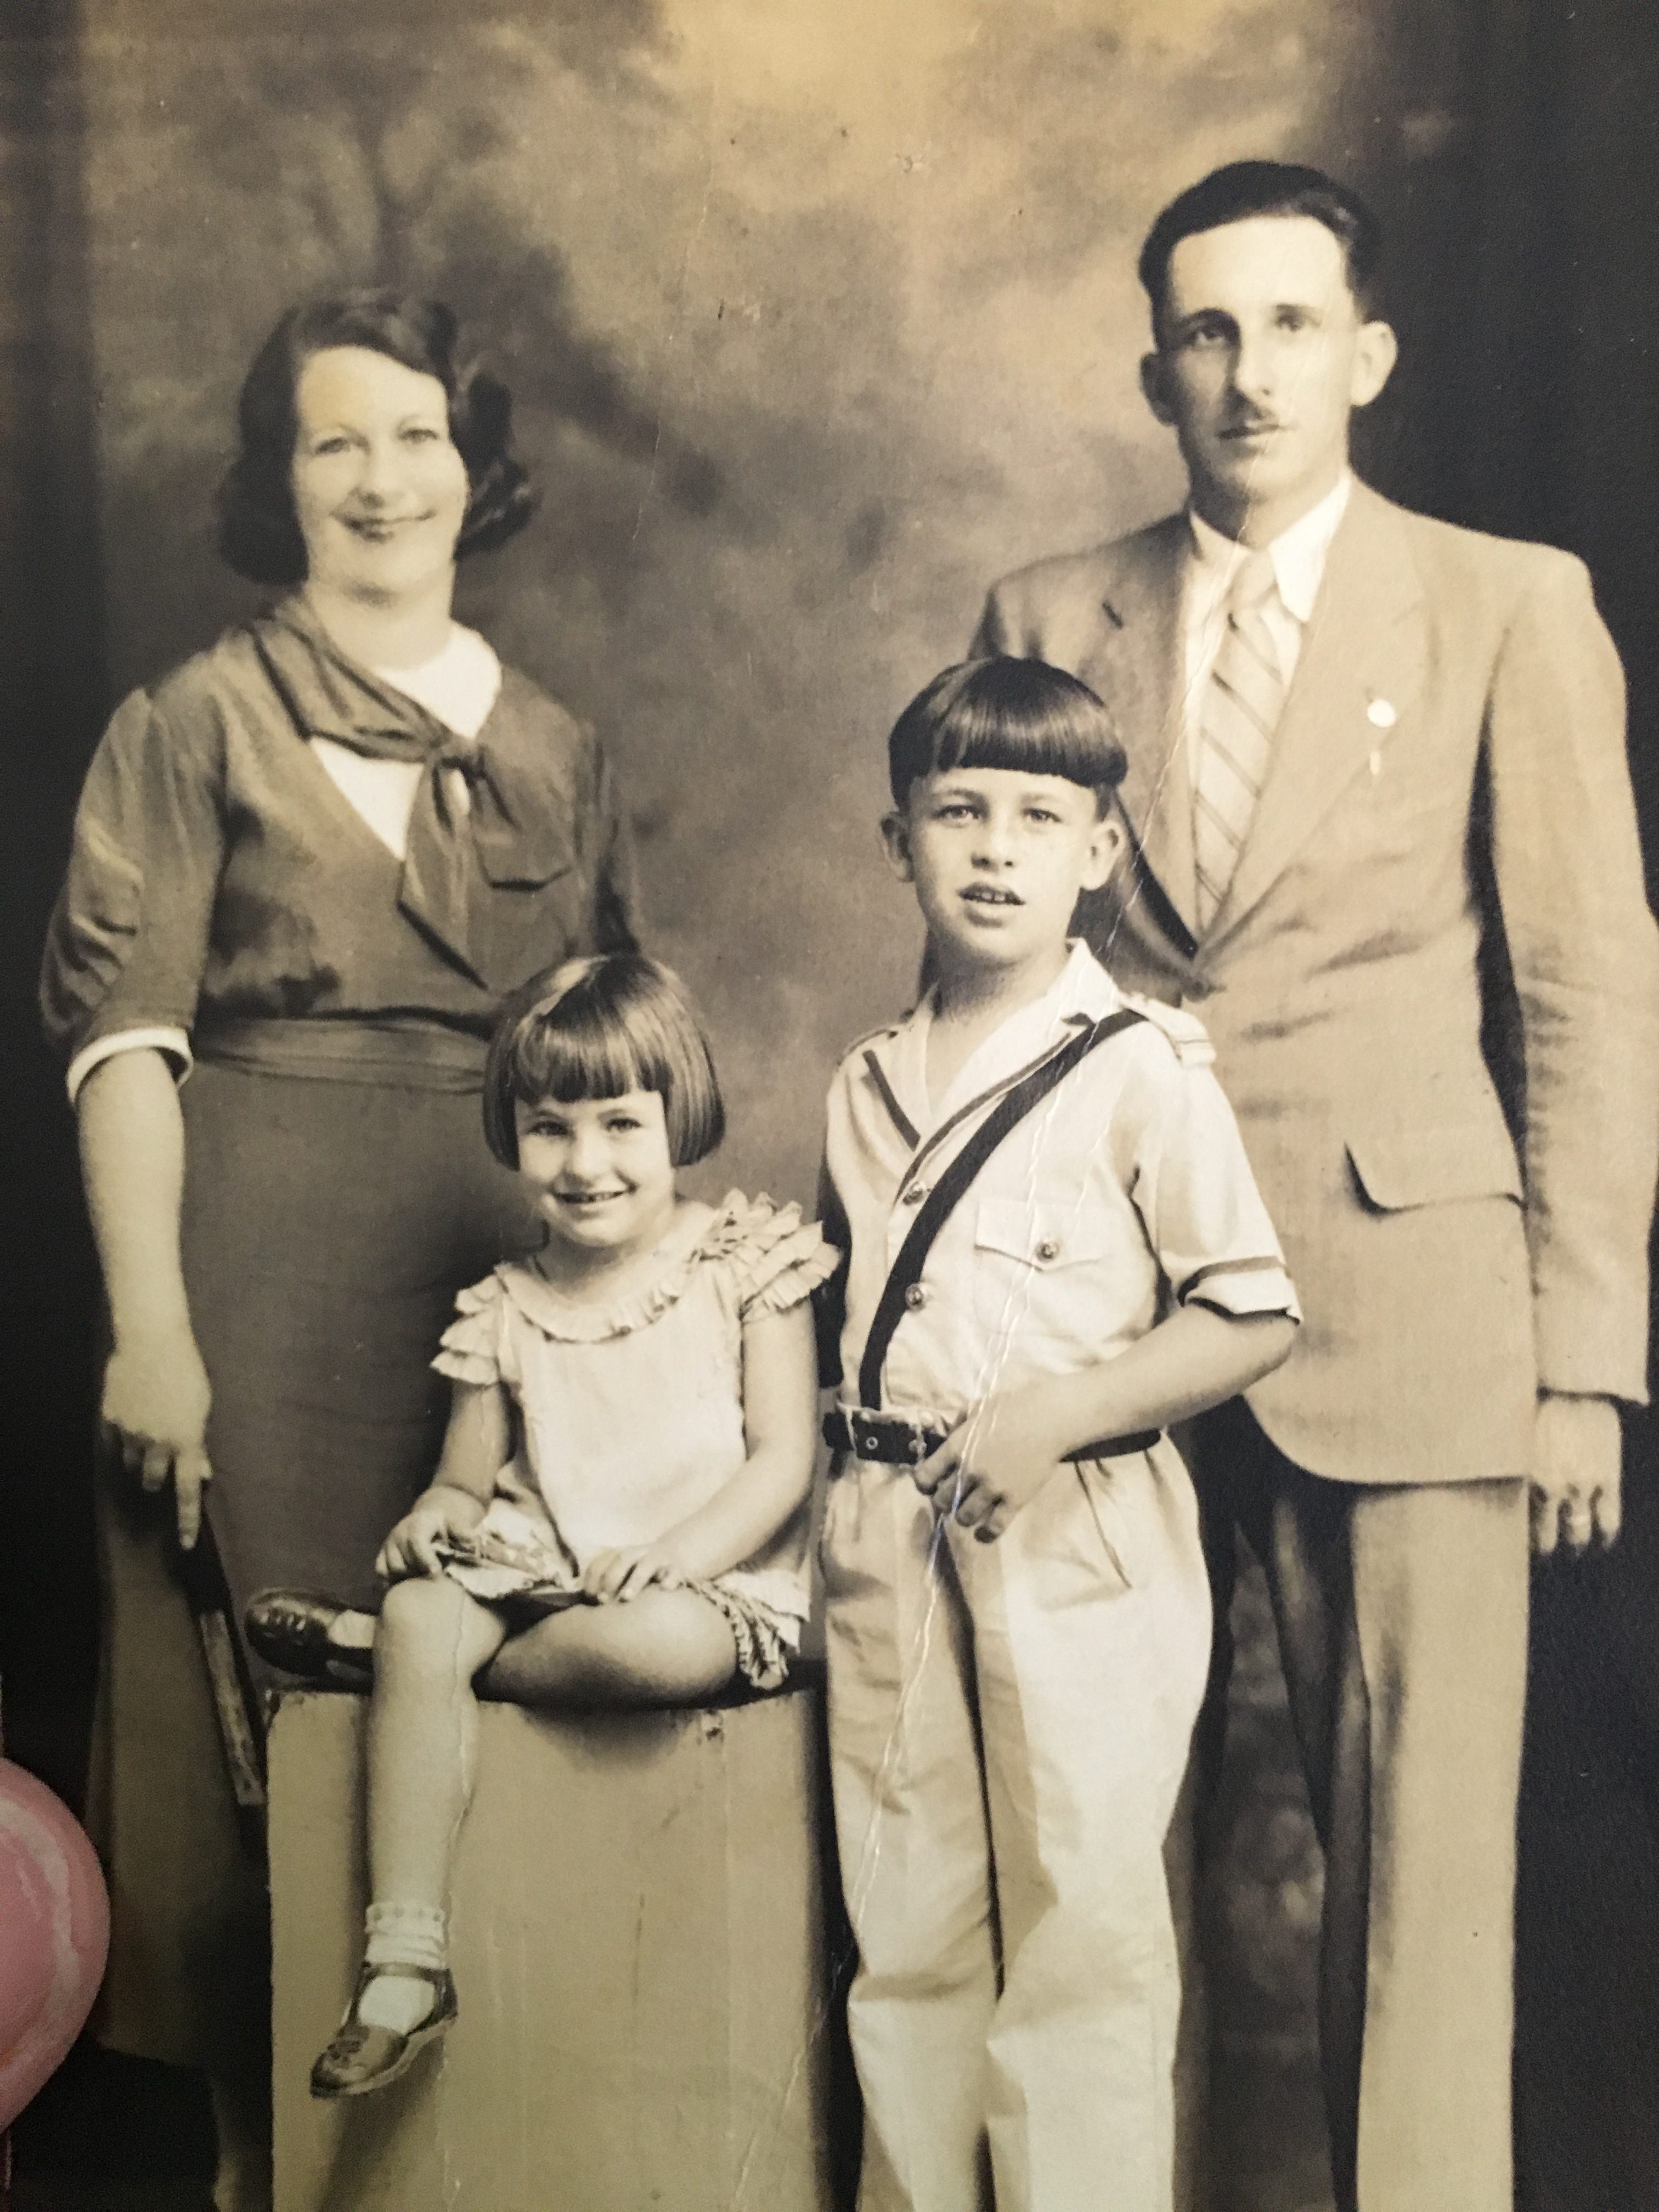 In this undated photo, my great grandparents, Julia and Marcelino Gonzalez  Sosa, pose with their children Gladys and Raul.